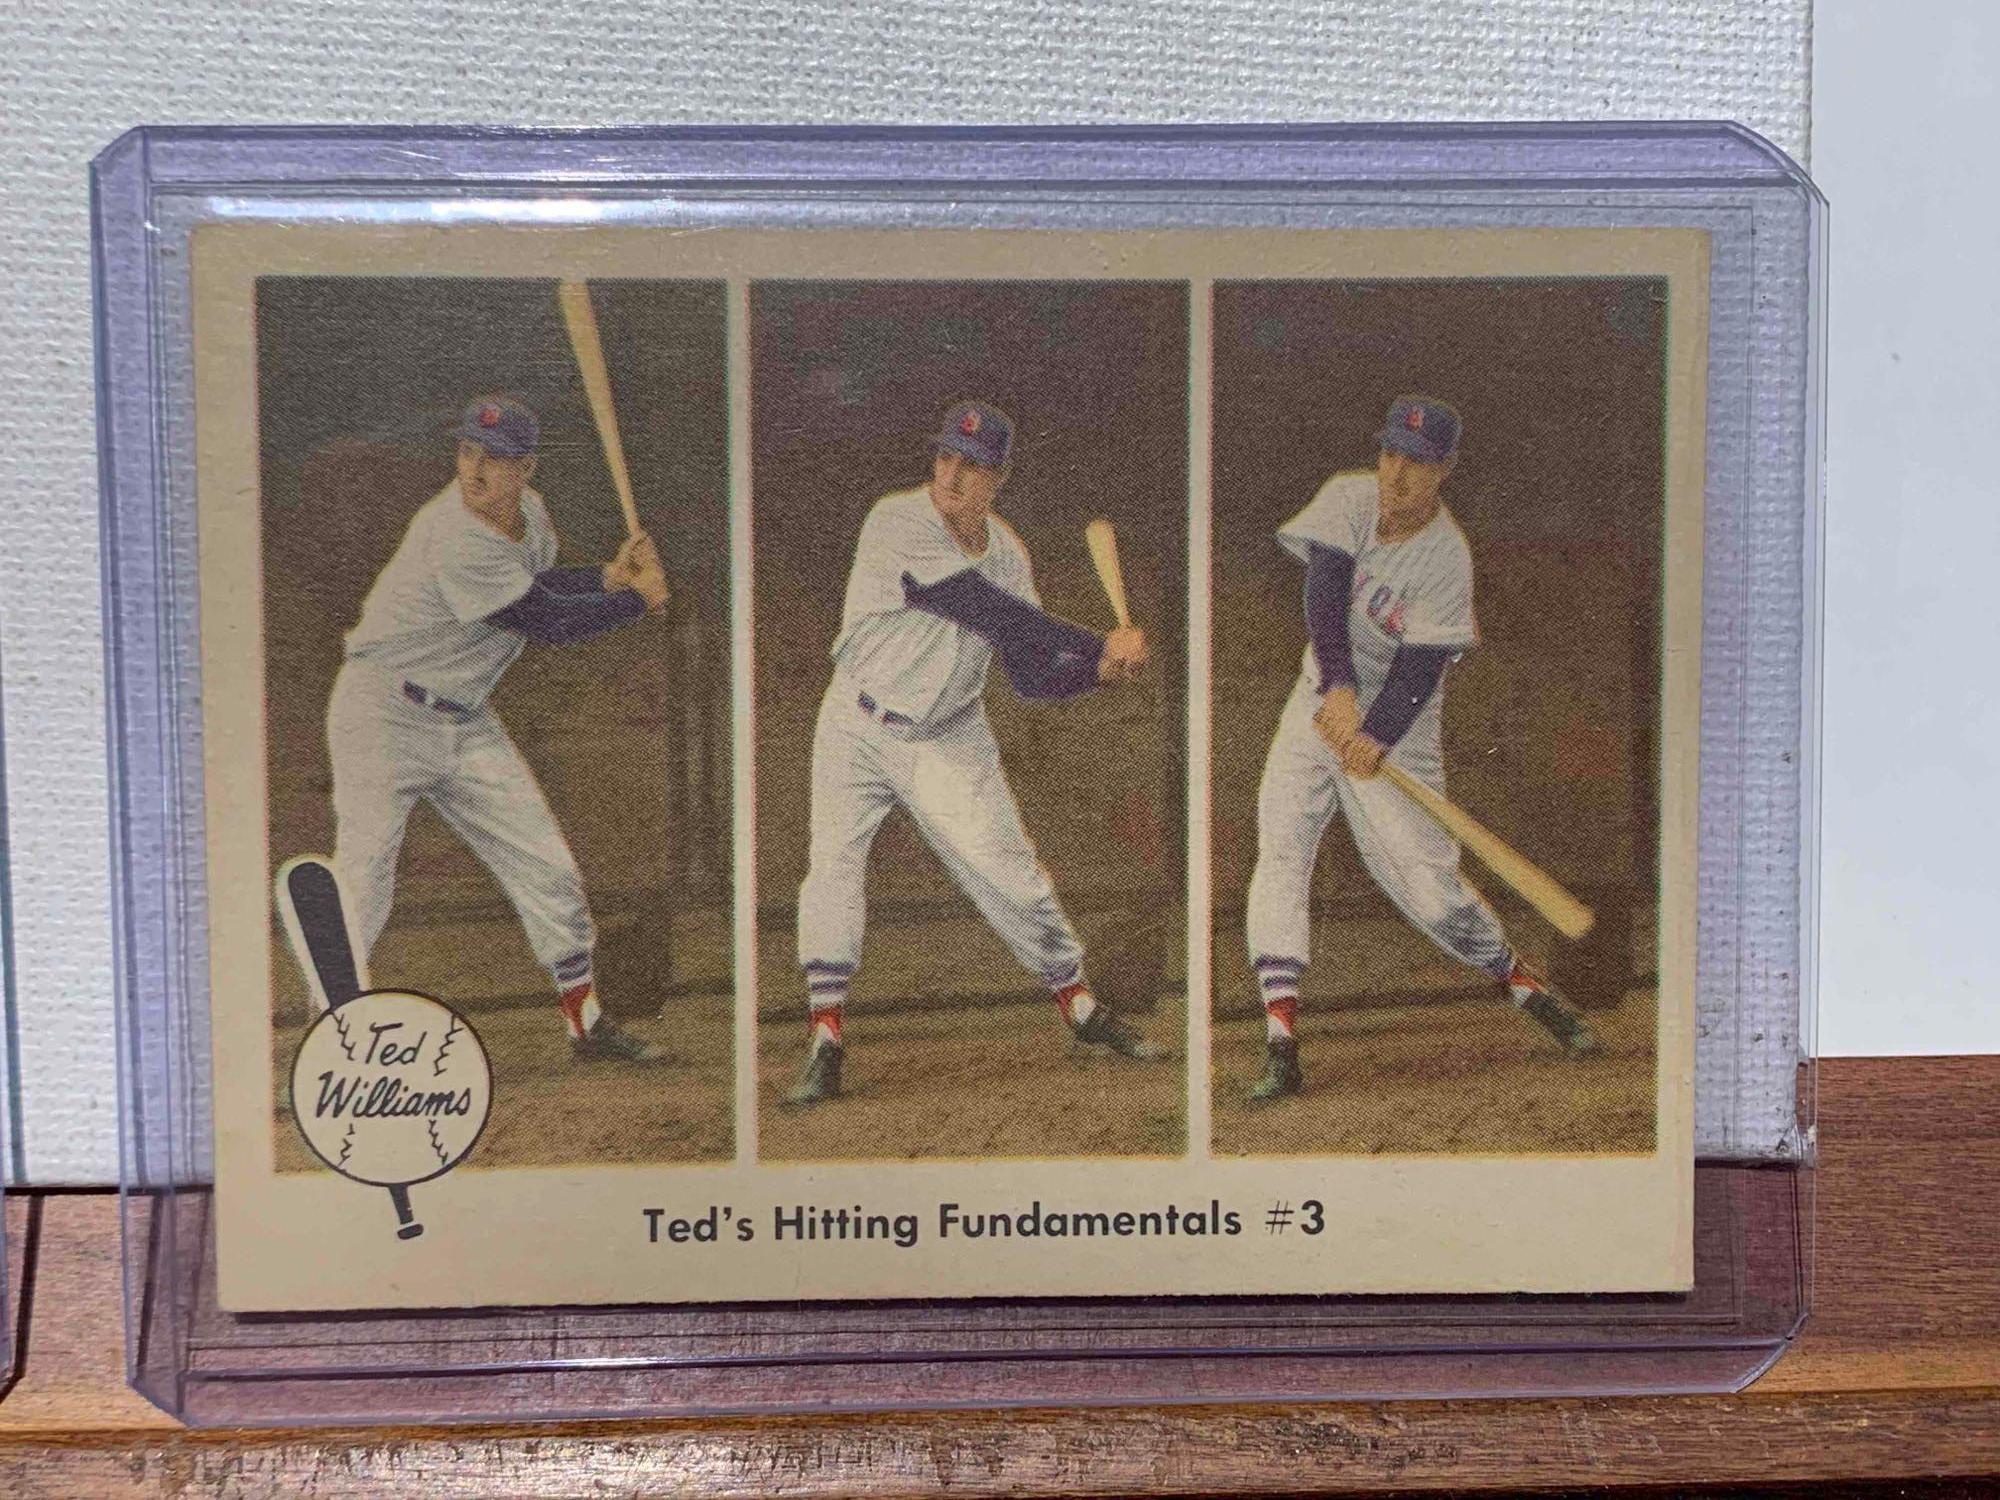 1959 Topps Ted Williams  Old baseball cards, Baseball cards, Ted williams